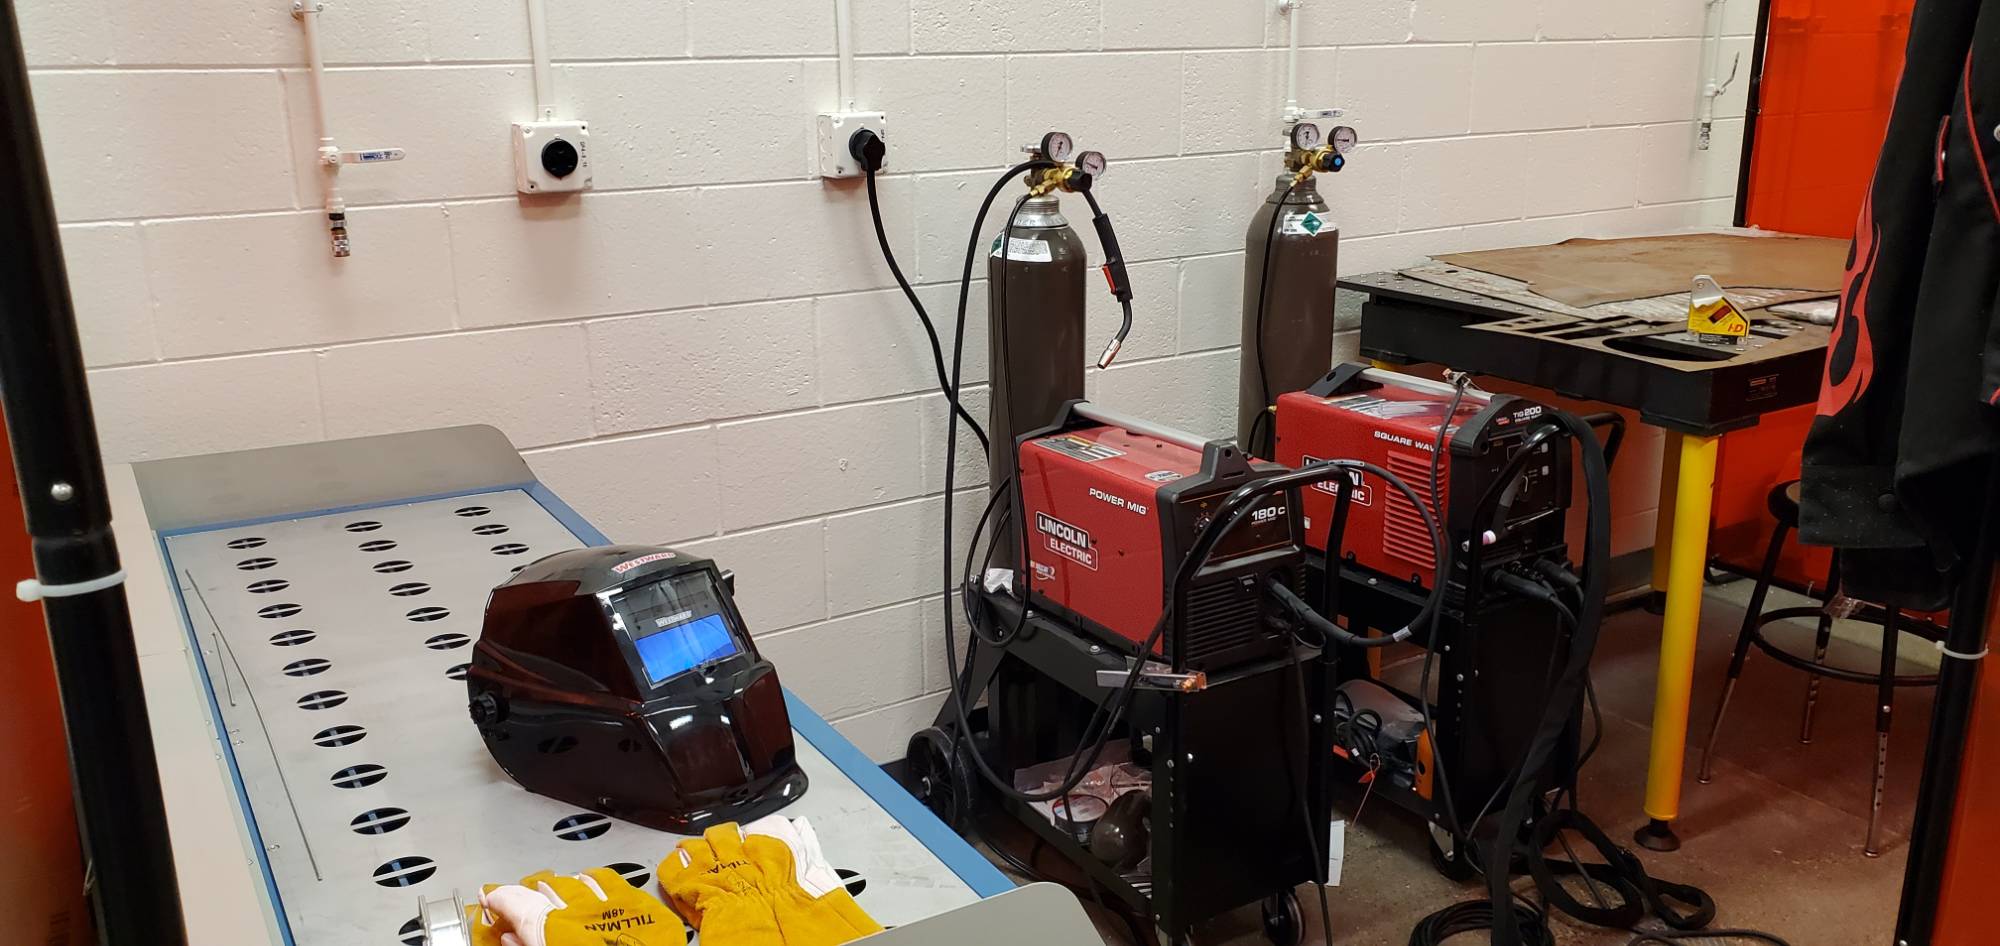 welding stations in the fabrication lab